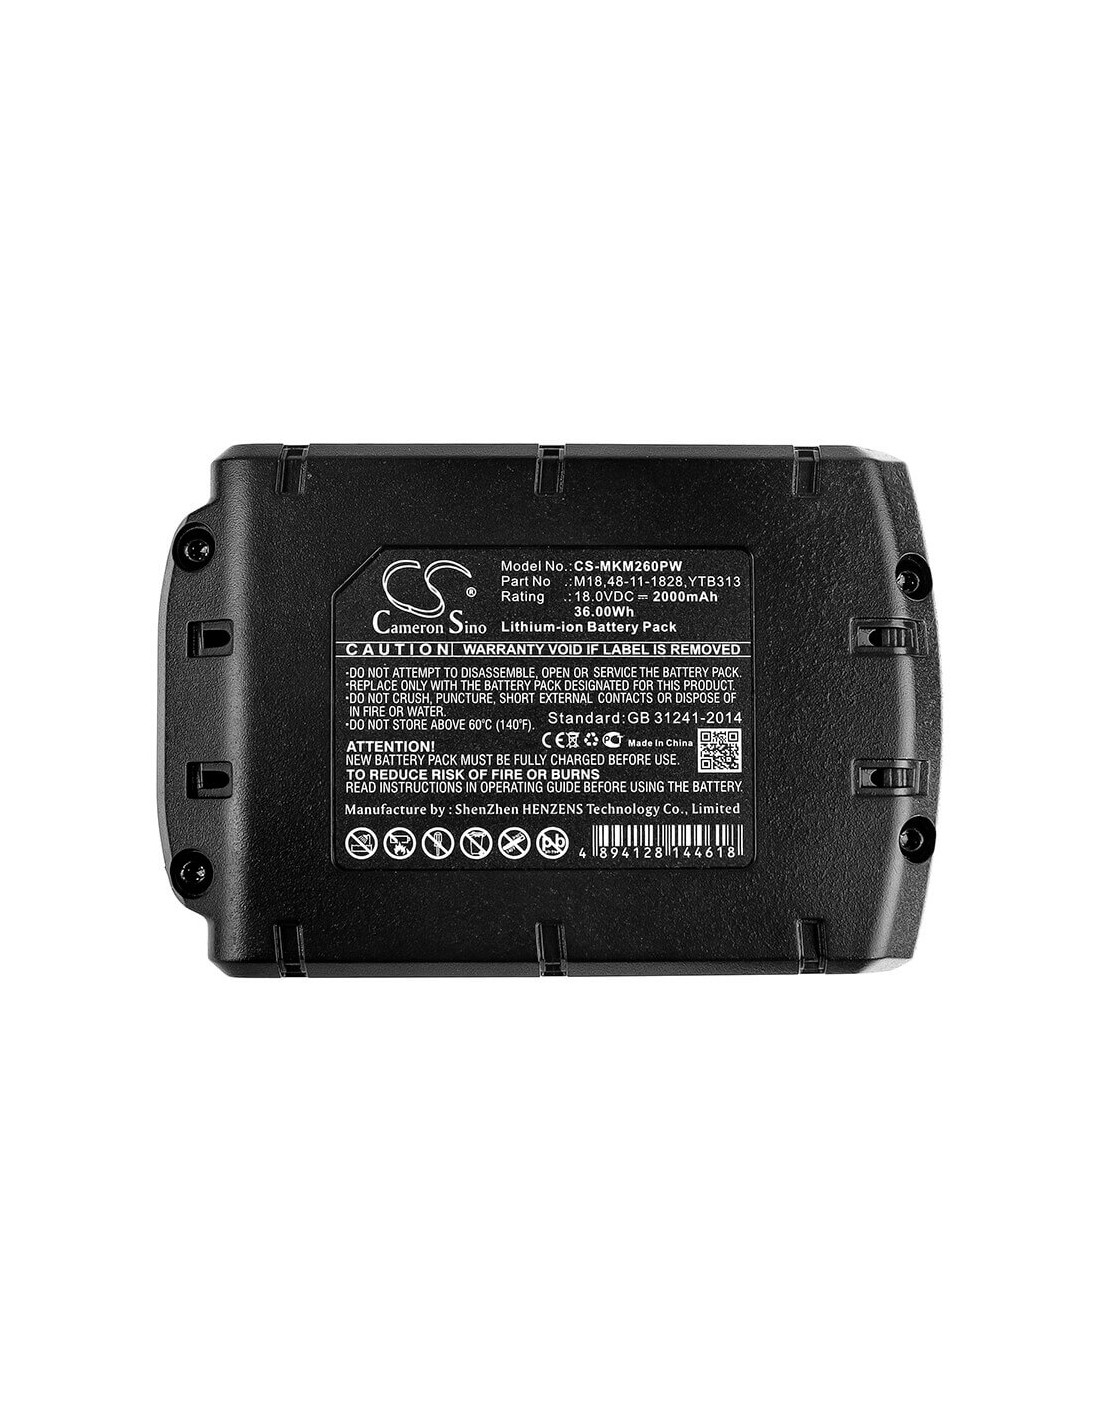 Milwaukee, 0880-20, 2601 replacement battery